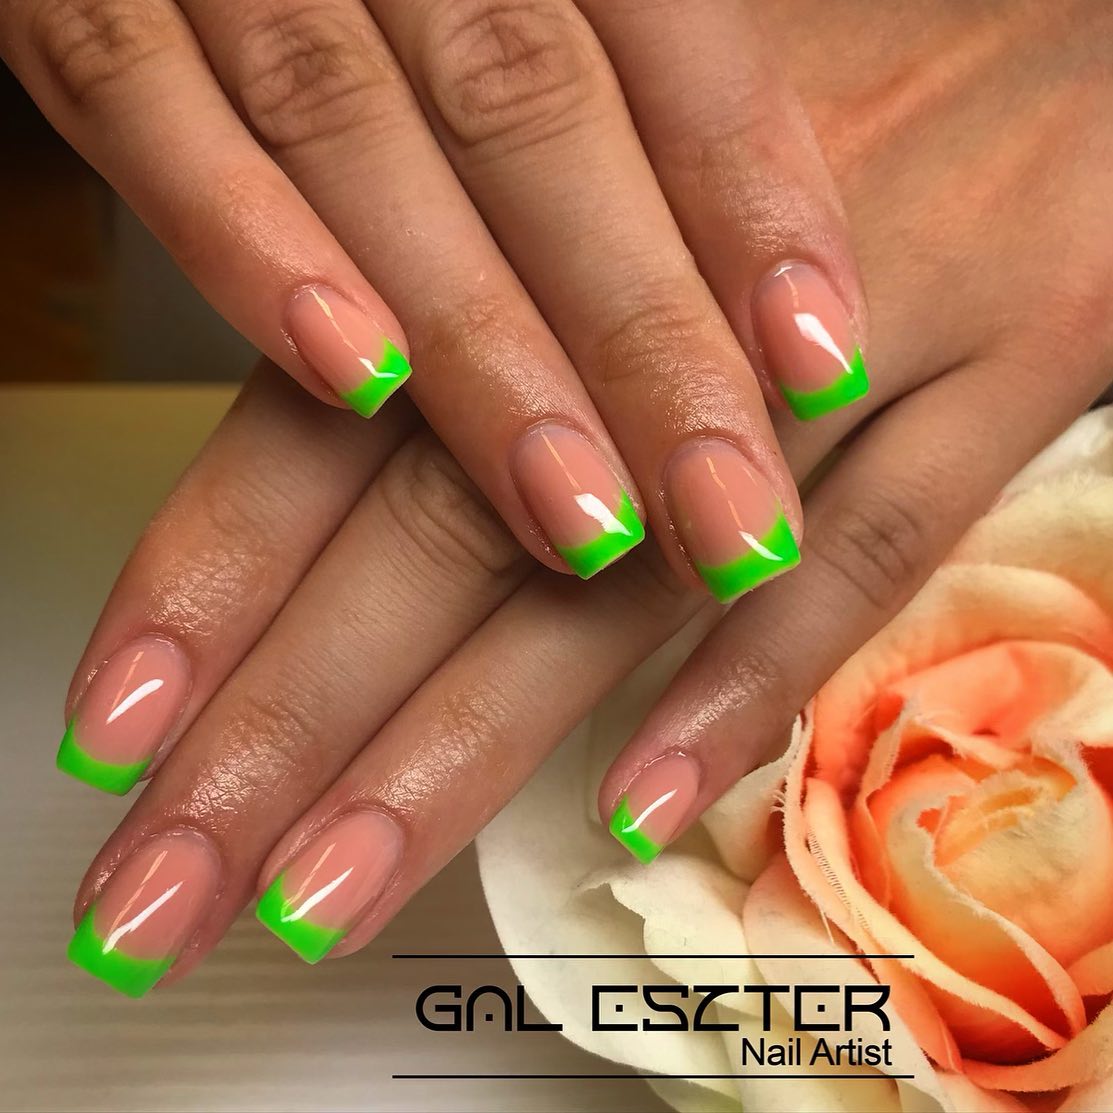 The square-shaped French mani and this pop of green will attract a lot of attention. If you like unusual green elements consider this design that you can do on your own and easily.